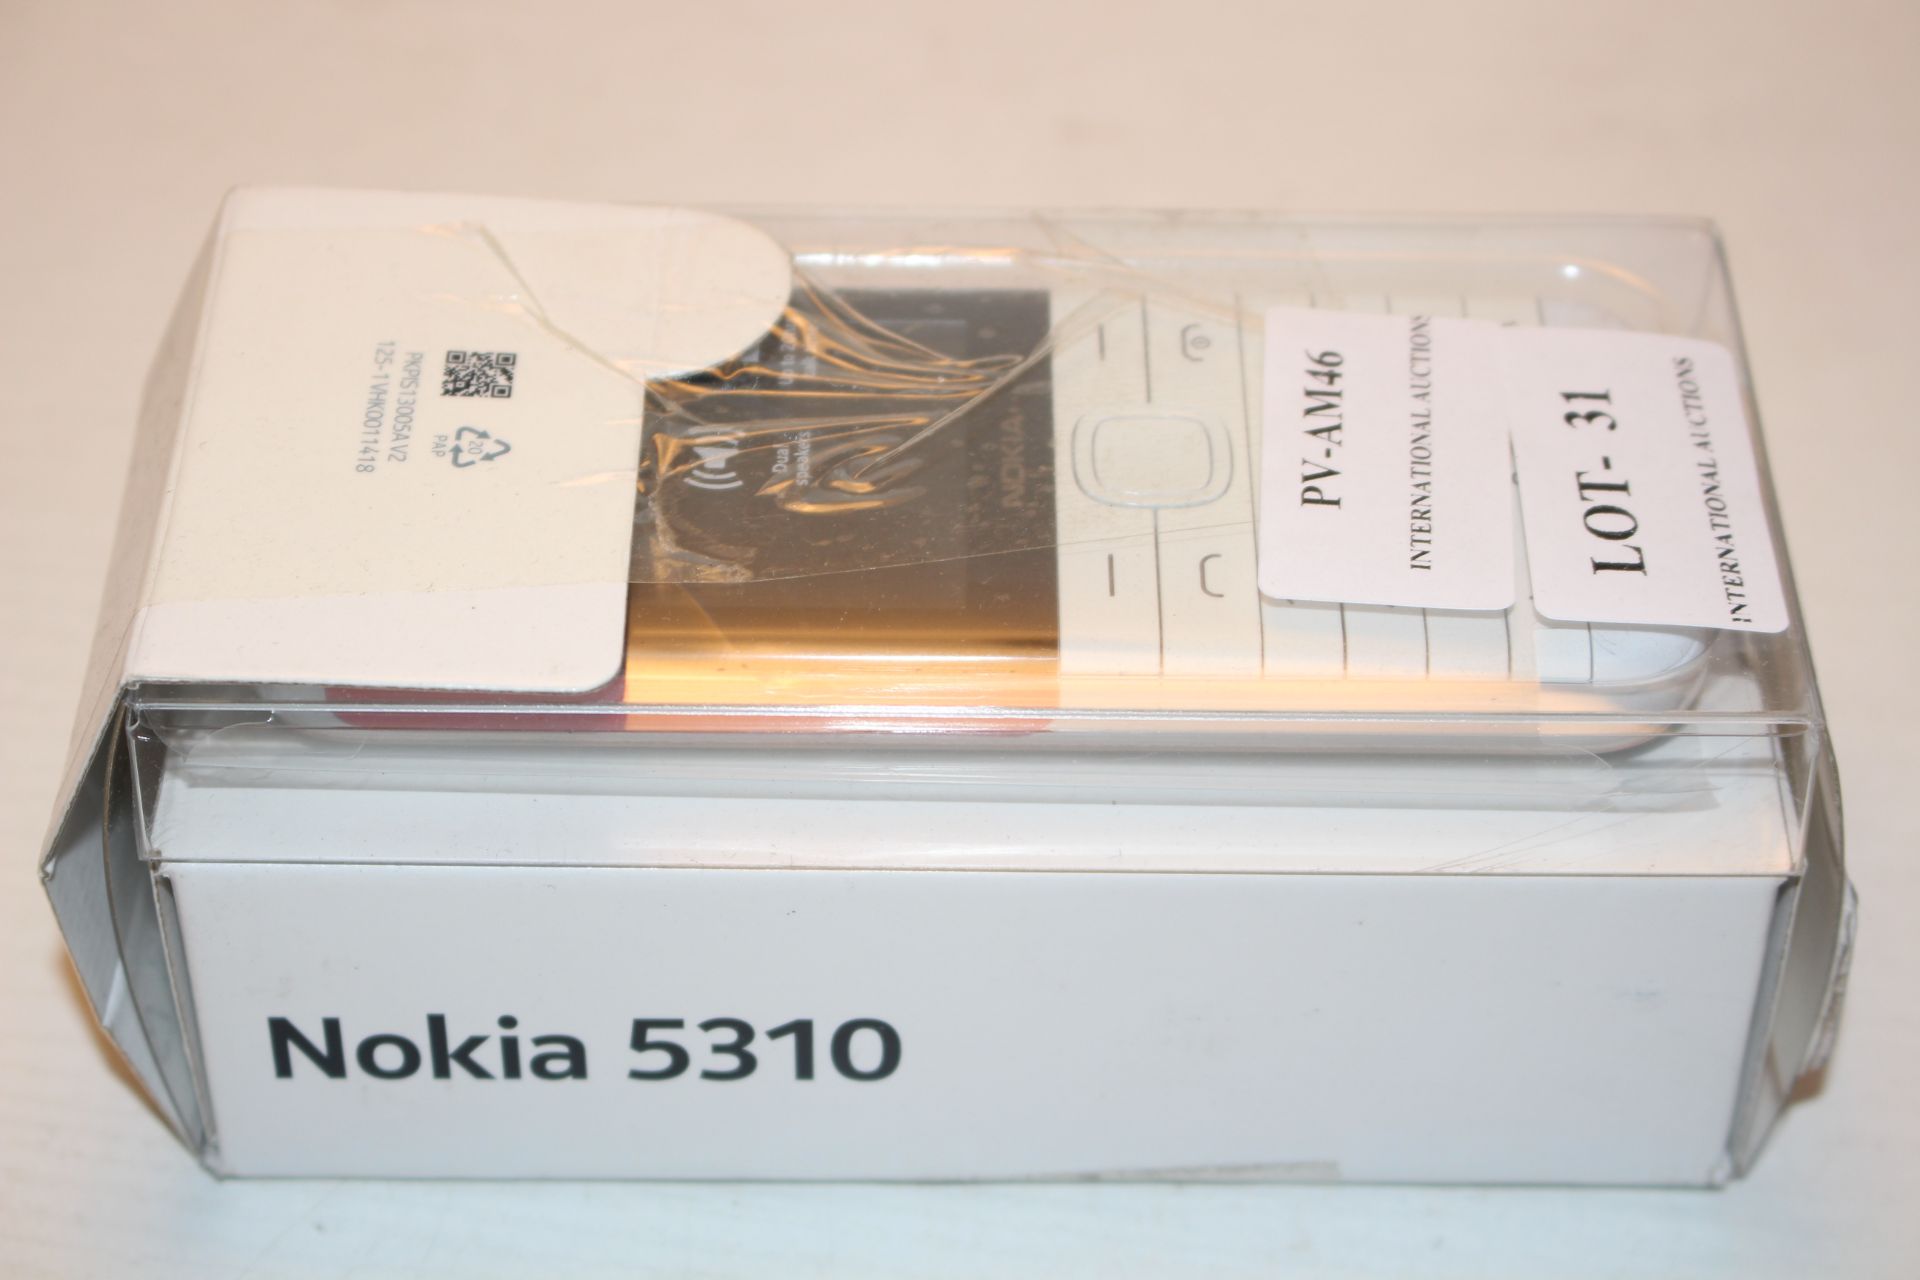 BOXED NOKIA 5310 MOBILE PHONE Condition ReportAppraisal Available on Request- All Items are